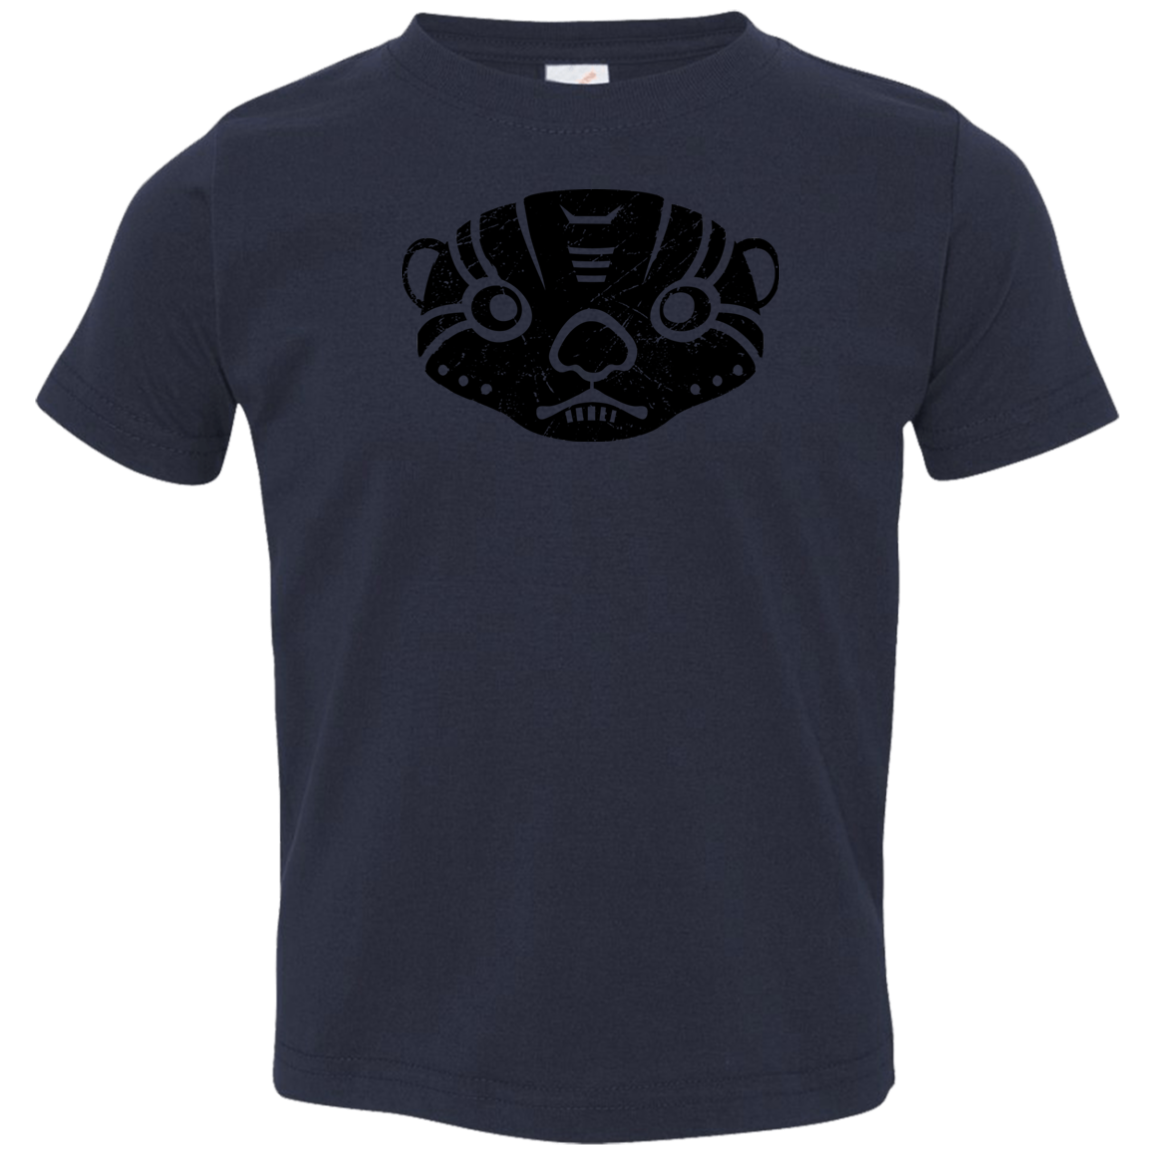 Black Distressed Emblem T-Shirts for Toddlers (Otter/Boxer) - Dark Corps